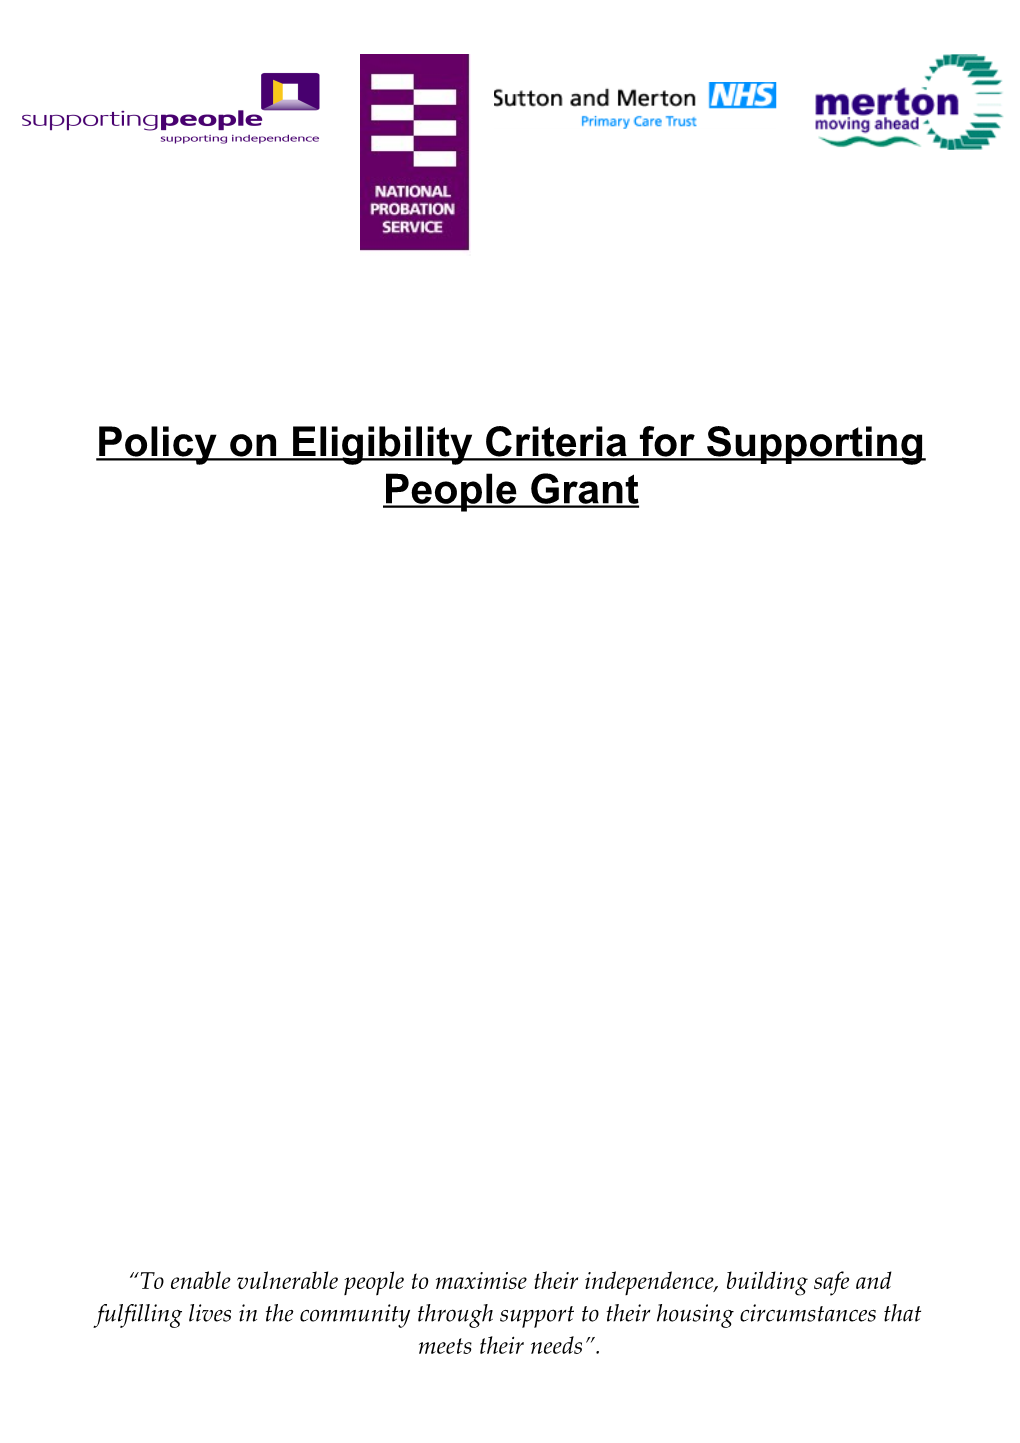 Policy on Eligibility Criteria for Supporting People Grant